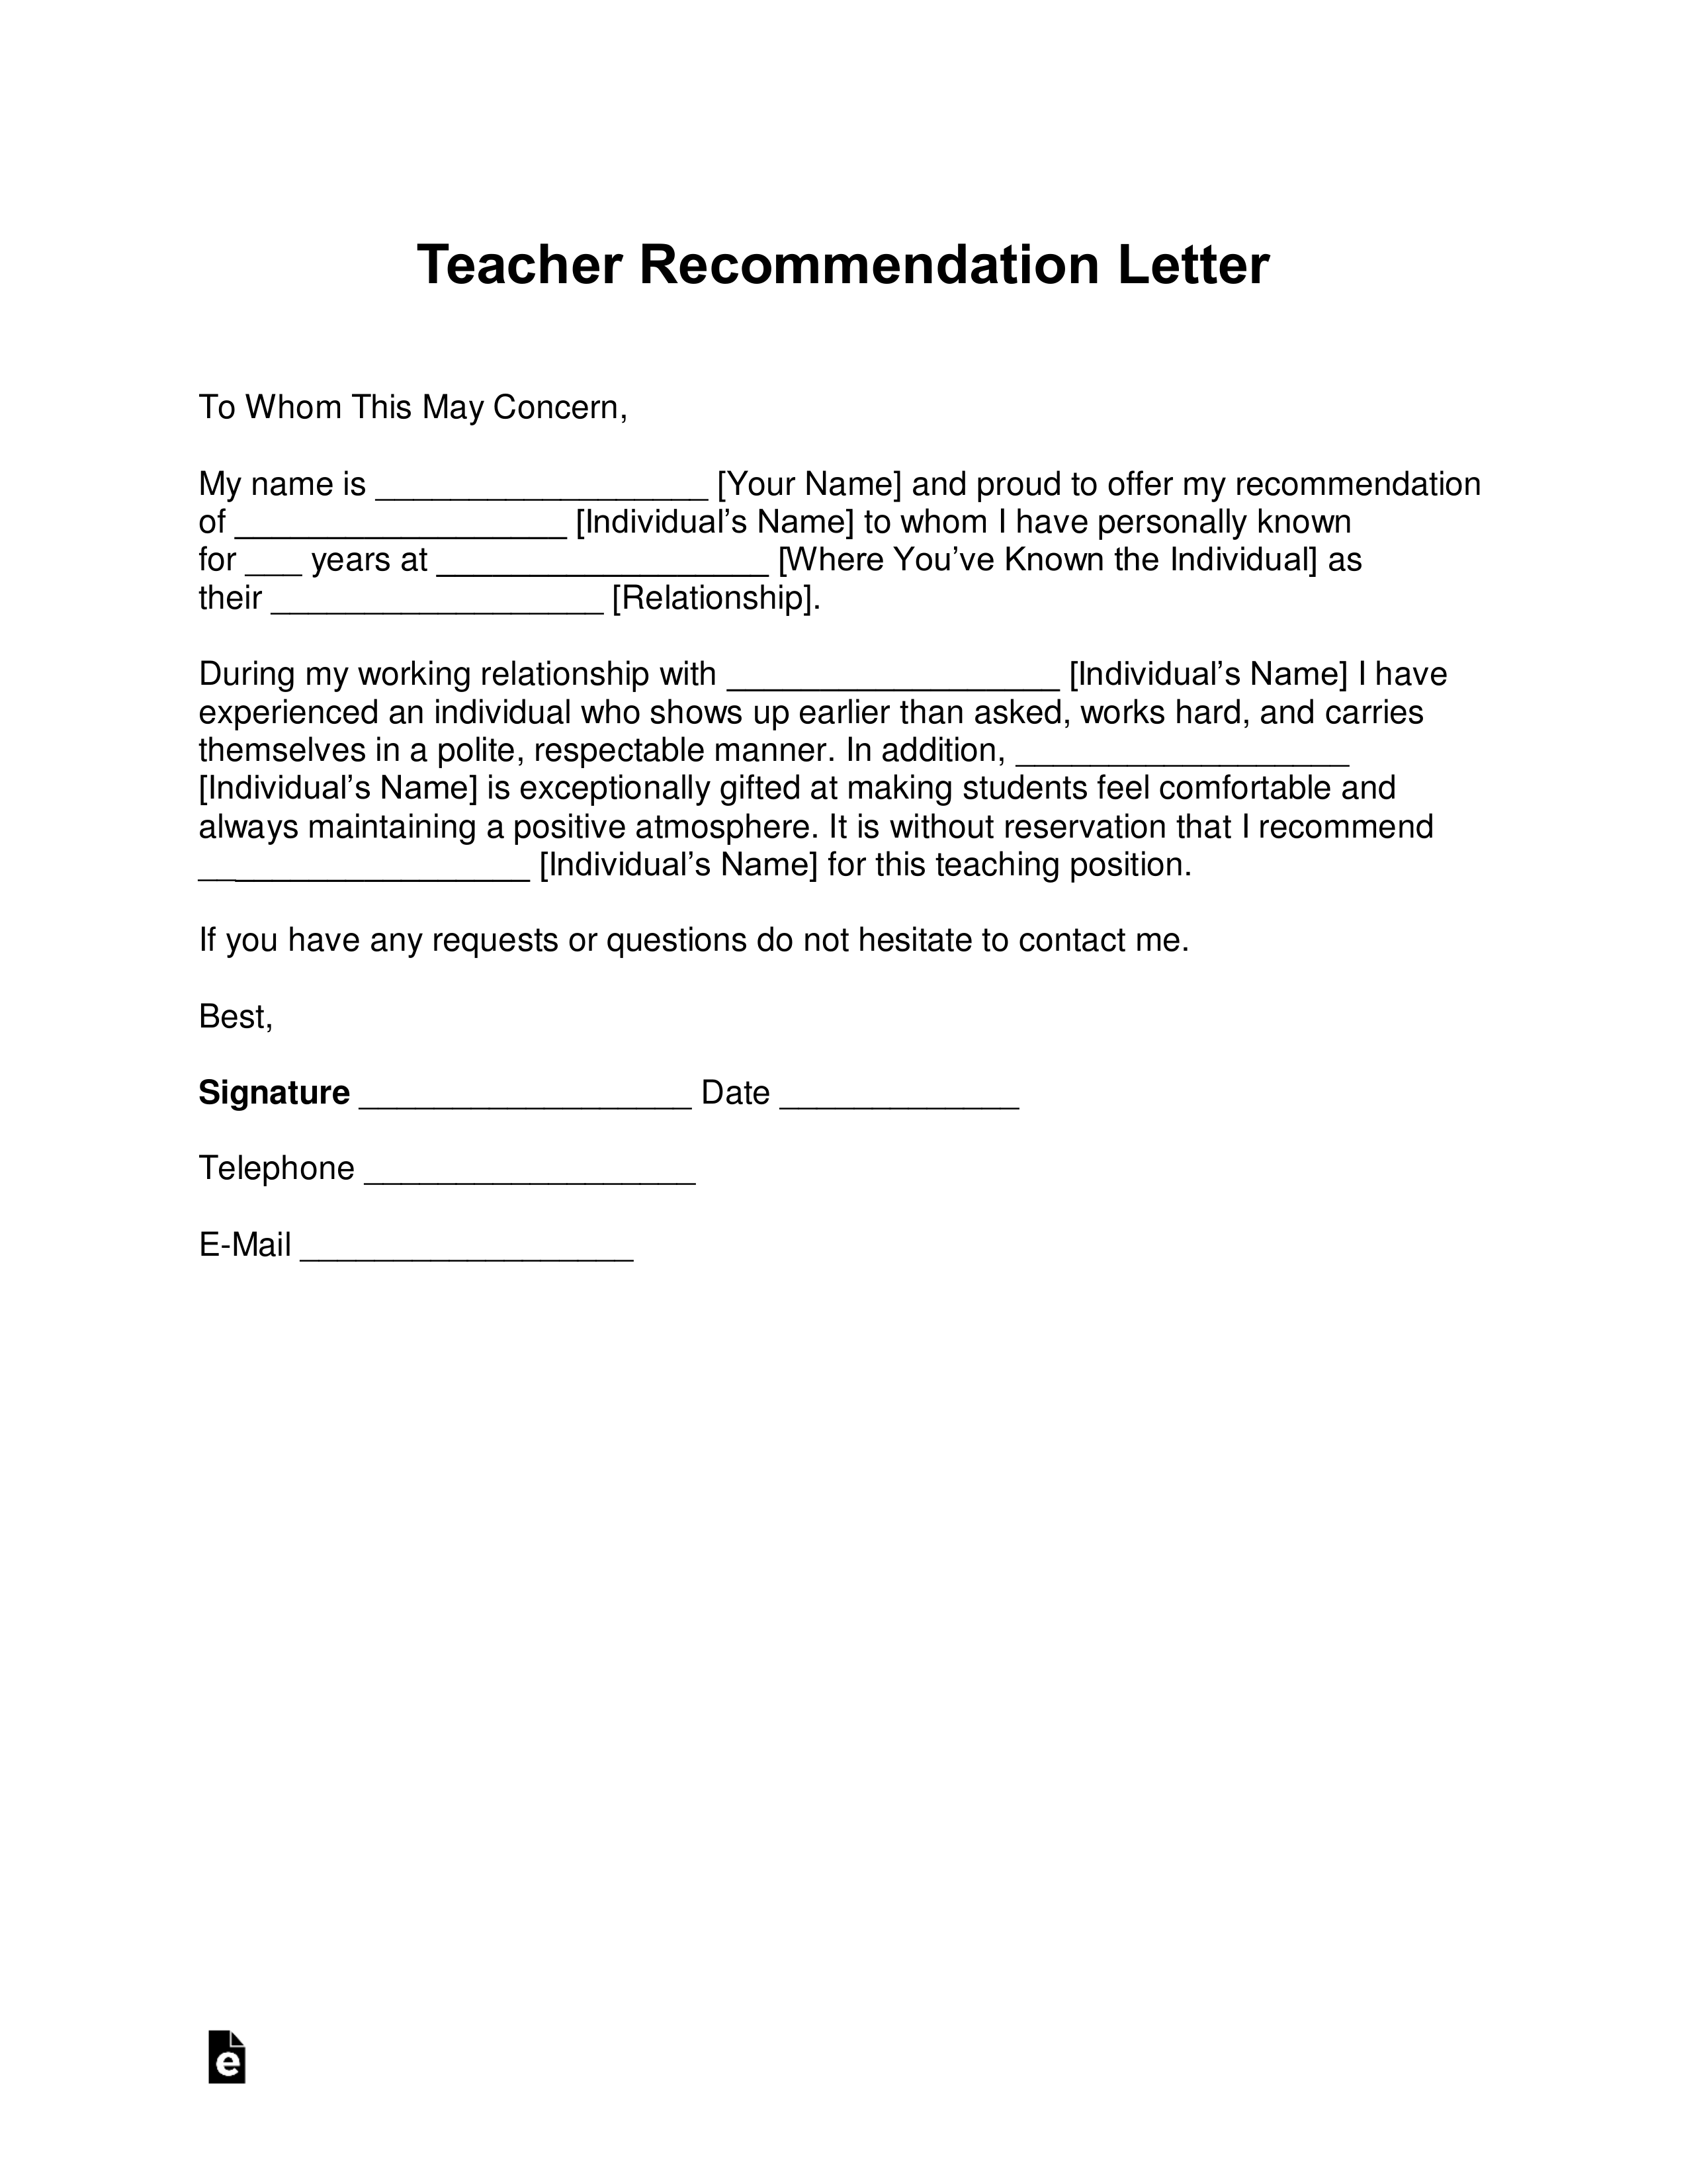 Business Recommendation Letter Template from eforms.com